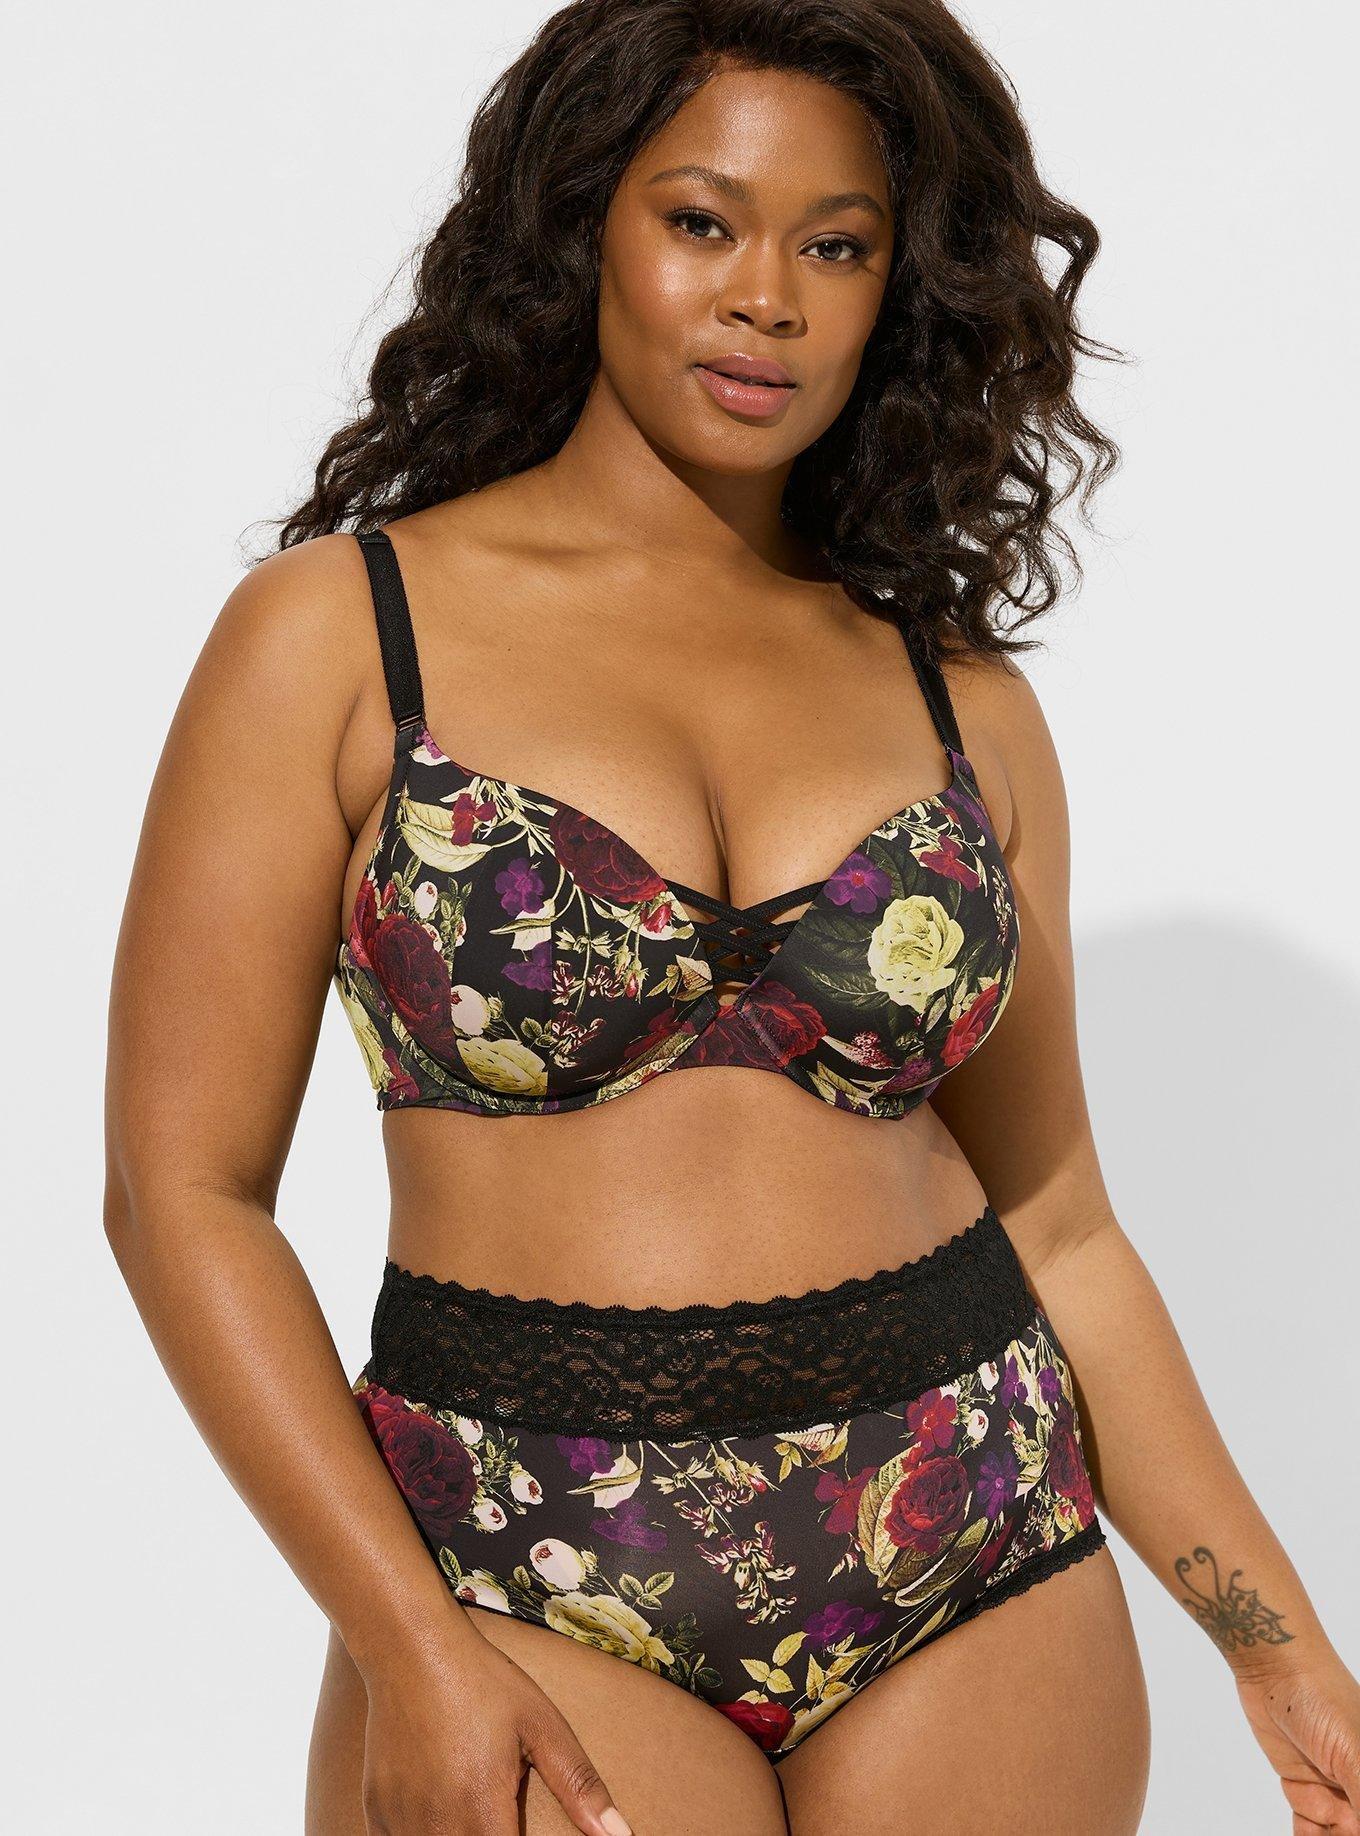 Cacique black floral lace lightly lined bra plus size 46C - $23 - From